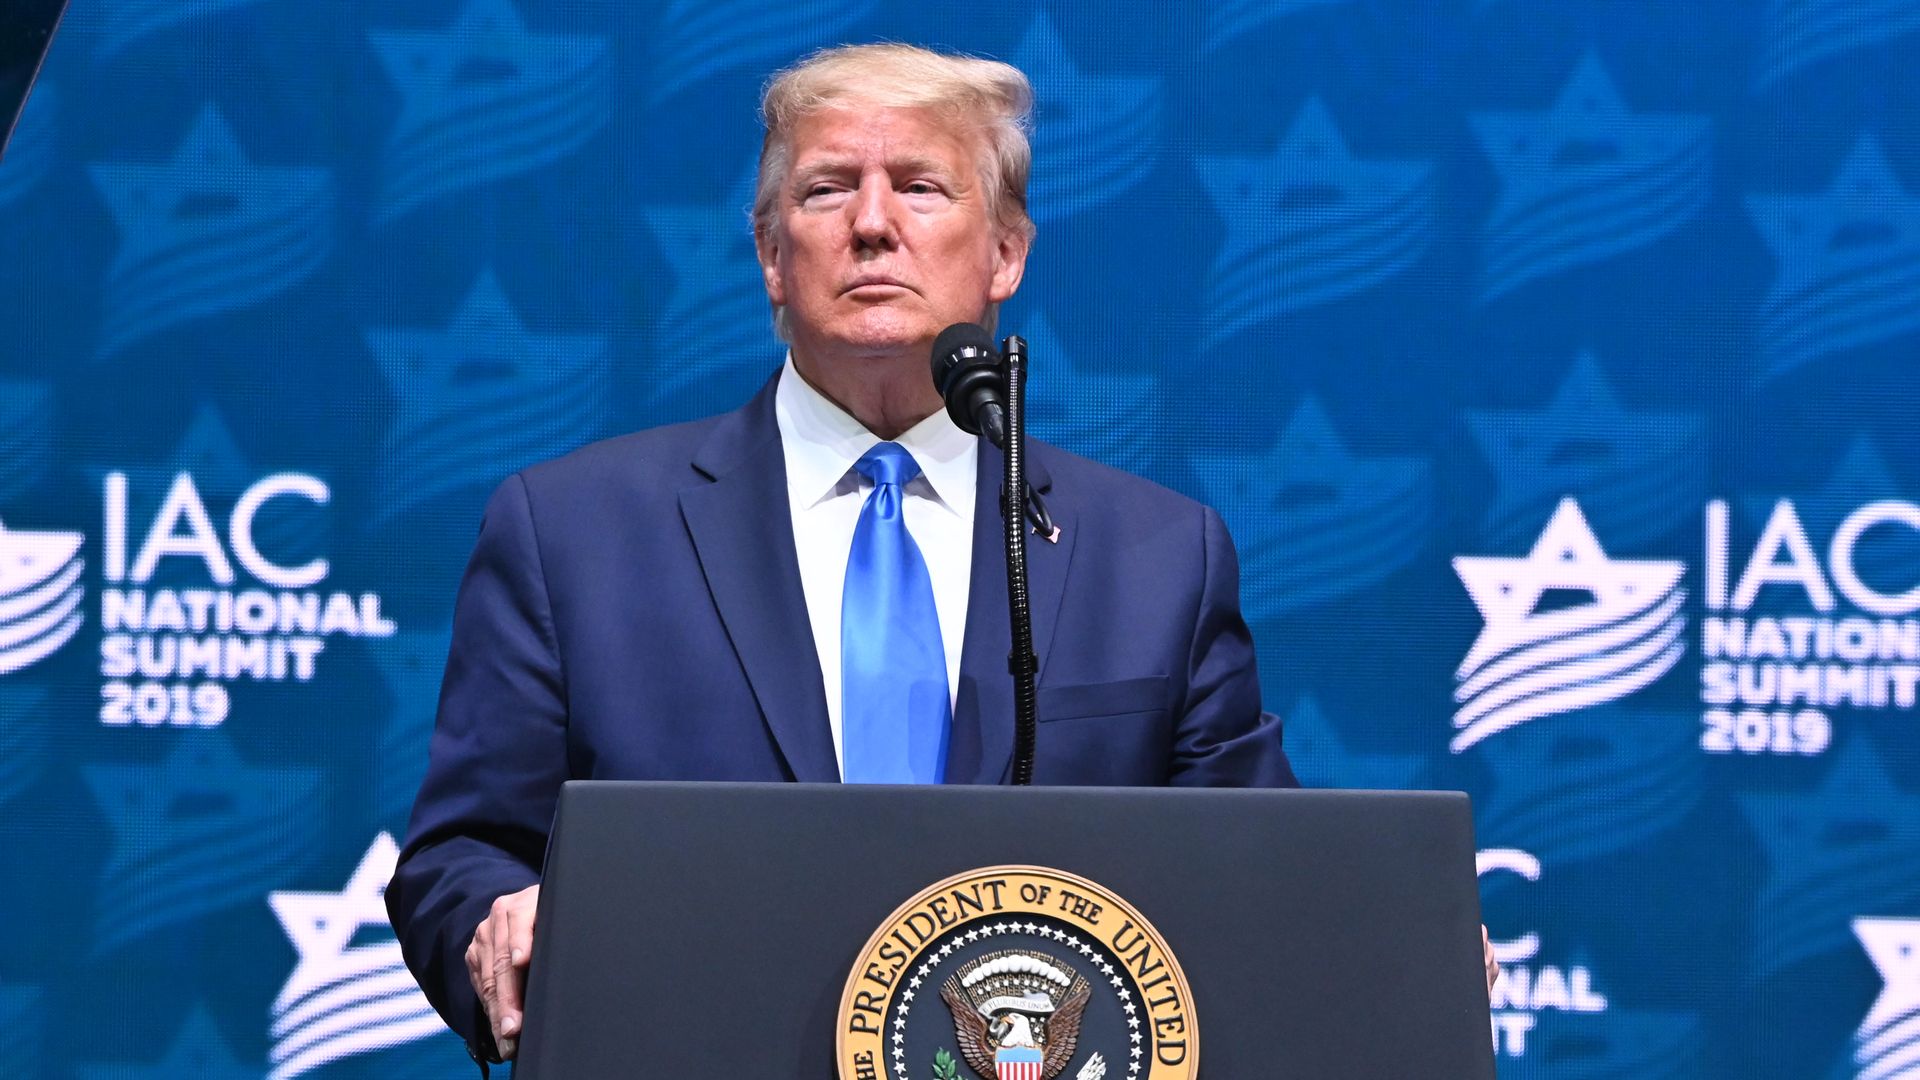  President Donald Trump speaks at the Israeli American Council National Summit on December 07, 2019 in Hollywood, Florida.